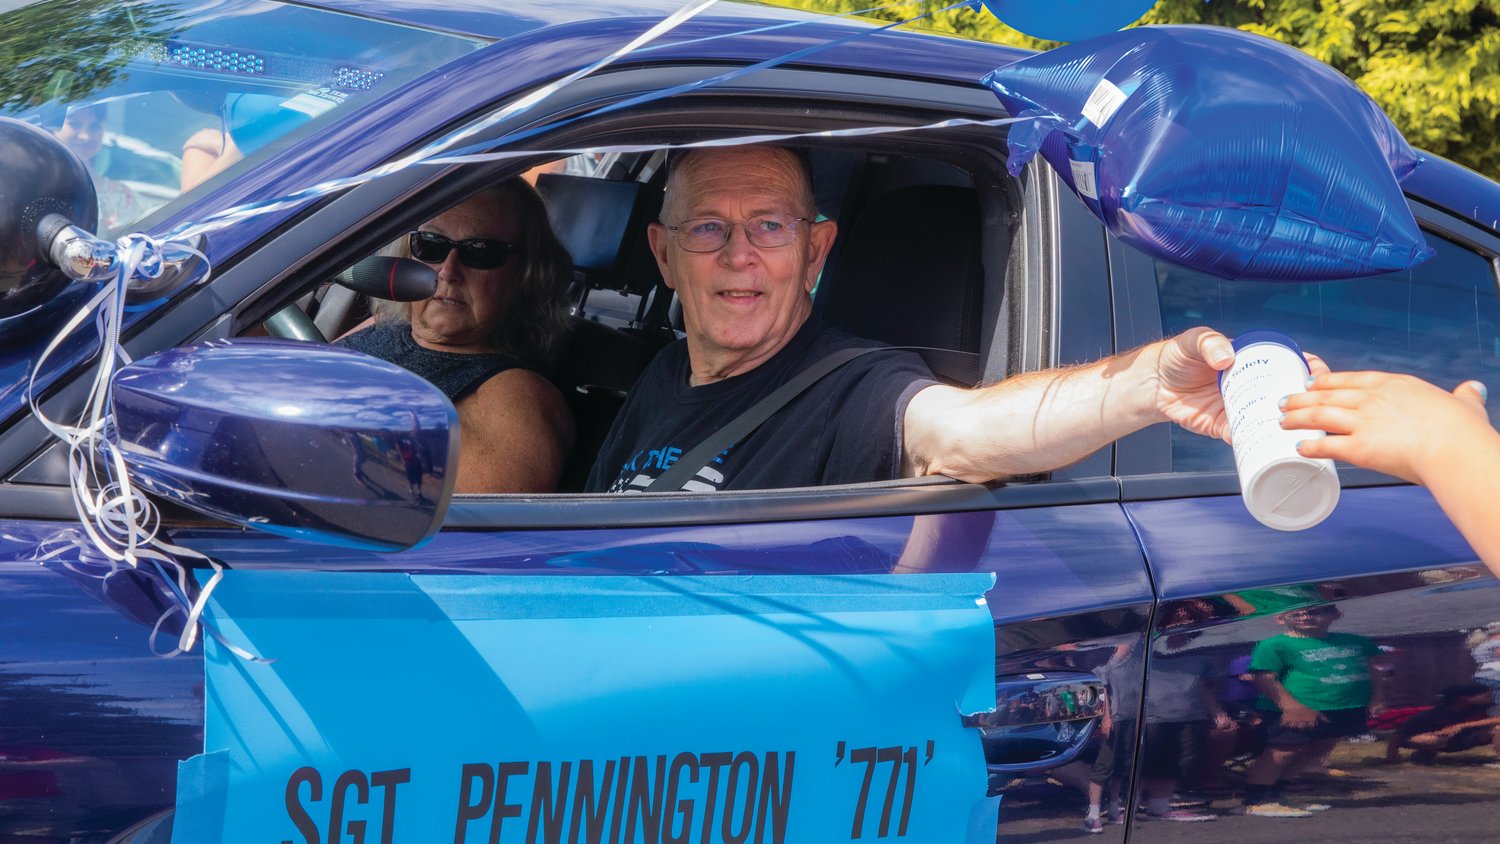 Former Toledo Police Department sergeant Randy Pennington, who retired July 5 after 36 years, smiles and passes out water bottles while driving through downtown Toledo during the Cheese Days parade in a cruiser decorated with balloons last weekend.